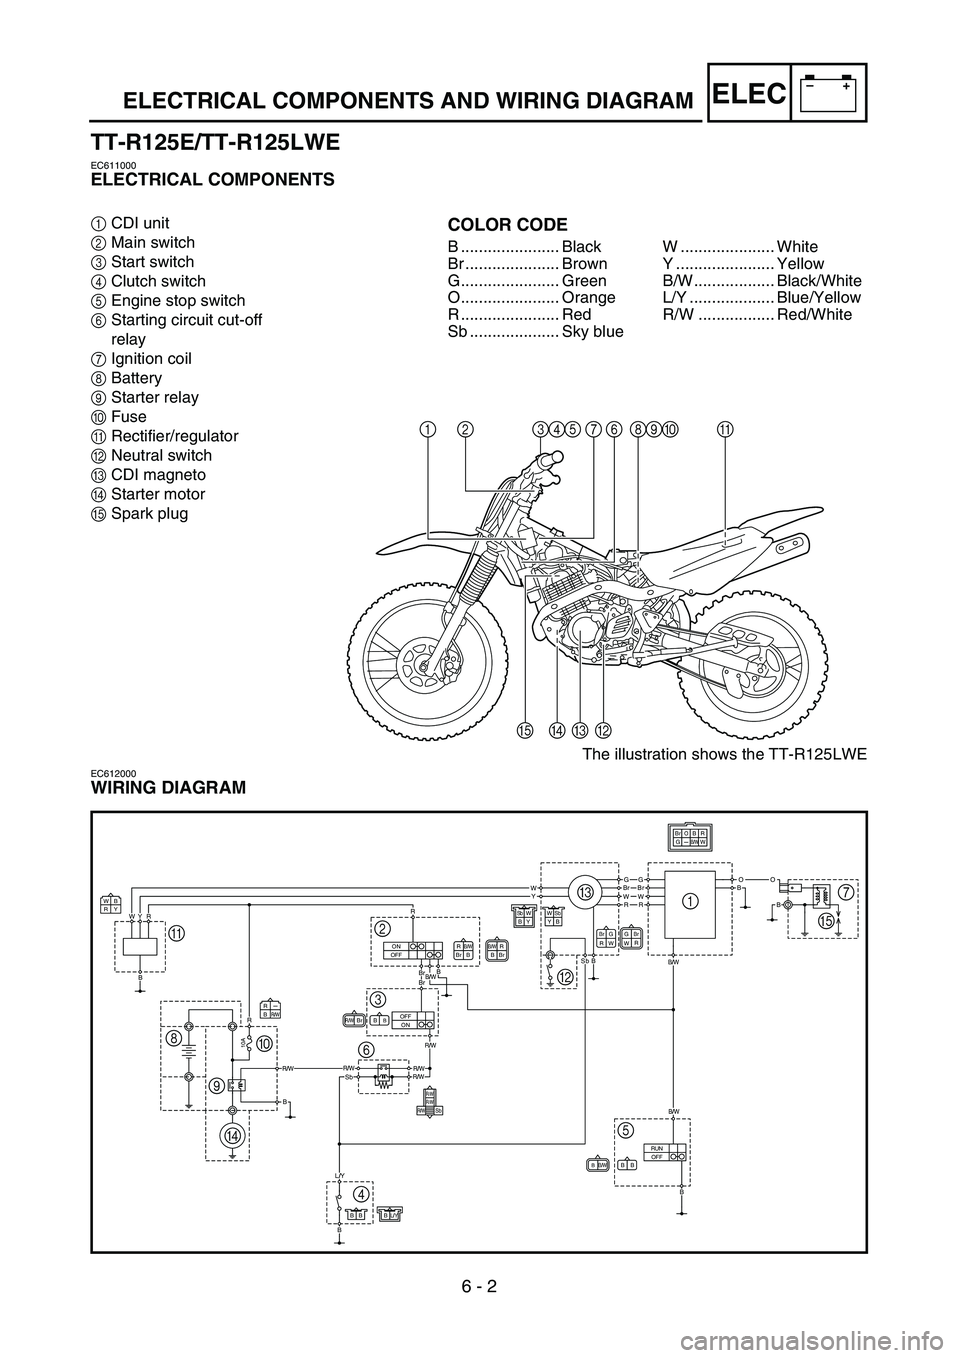 YAMAHA TTR125 2004  Betriebsanleitungen (in German) 6 - 2
–+ELEC
The illustration shows the TT-R125LWE
12345 7 6890A
EDCB
ELECTRICAL COMPONENTS AND WIRING DIAGRAM
TT-R125E/TT-R125LWE
EC611000
ELECTRICAL COMPONENTS
1CDI unit
2Main switch
3Start switch